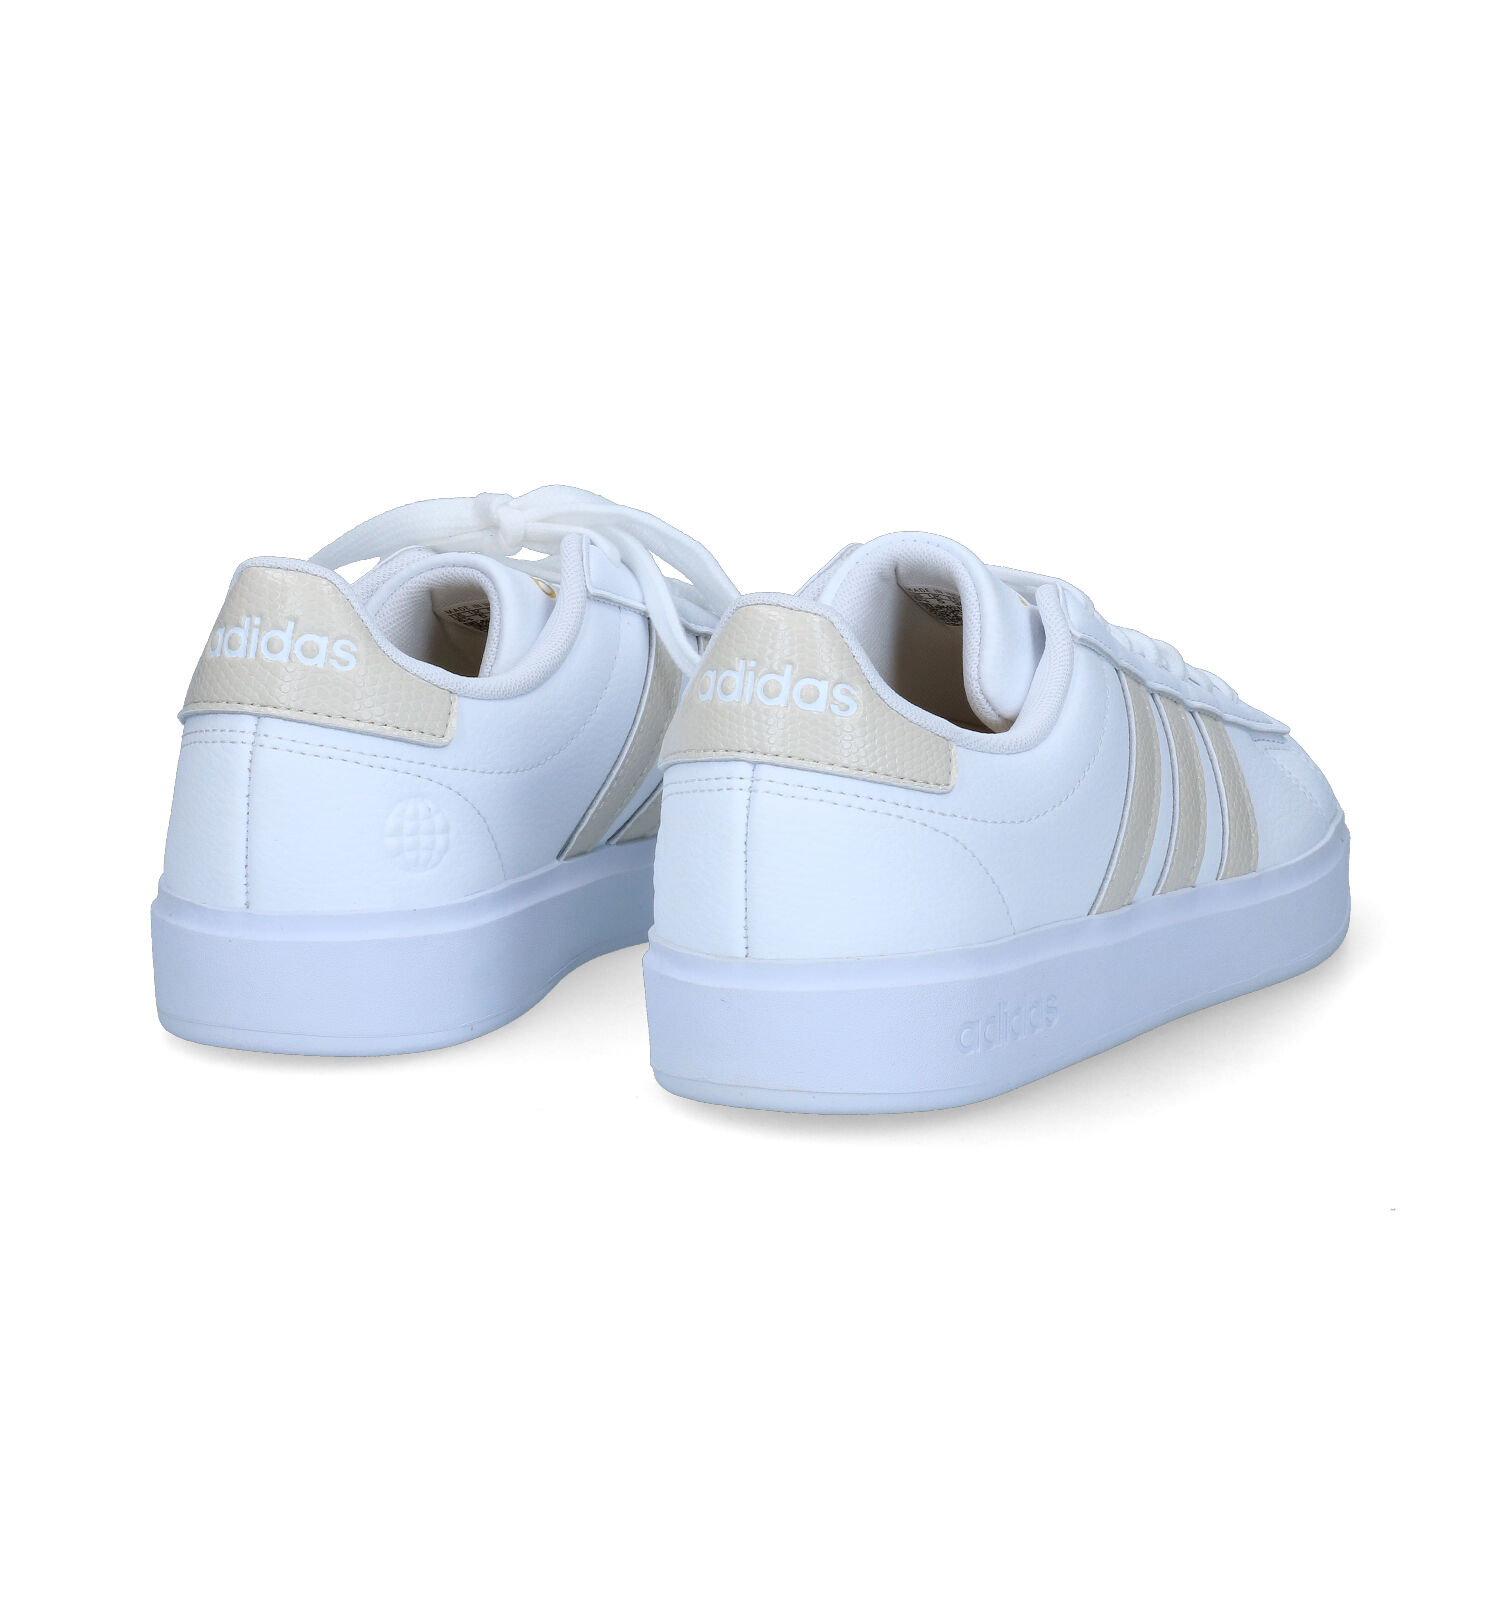 Hoes Passend Hub adidas Grand Court 2.0 Witte Sneakers Dames Sportieve sneakers | TORFS.BE